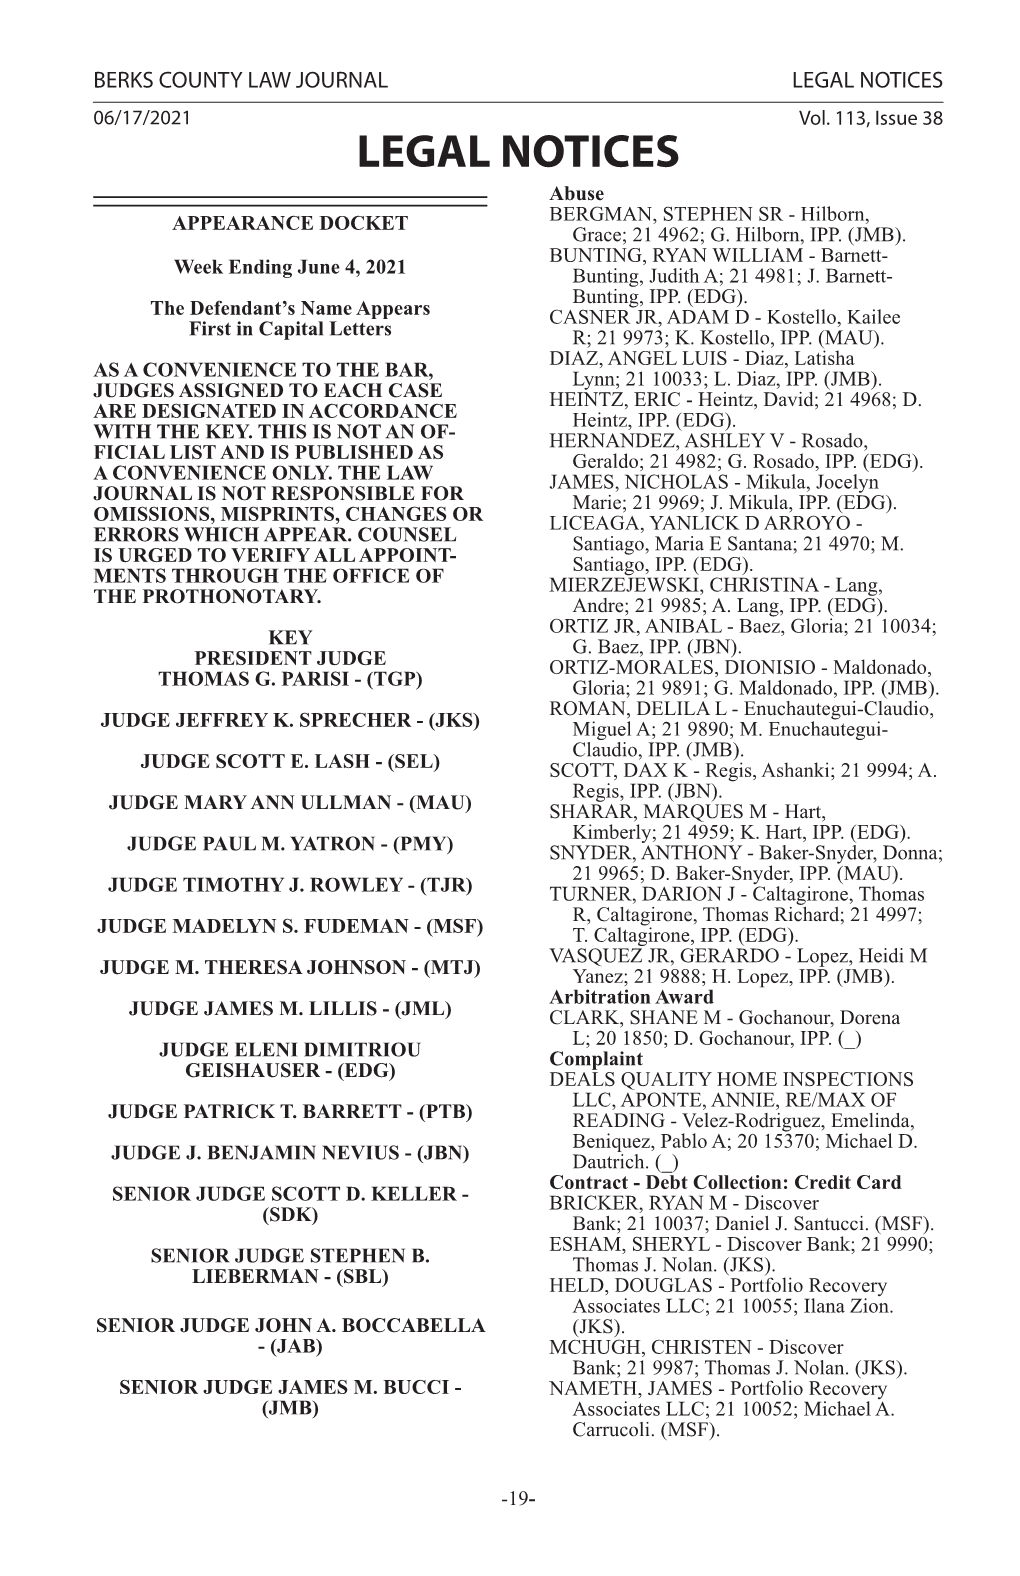 BERKS COUNTY LAW JOURNAL LEGAL NOTICES 06/17/2021 Vol